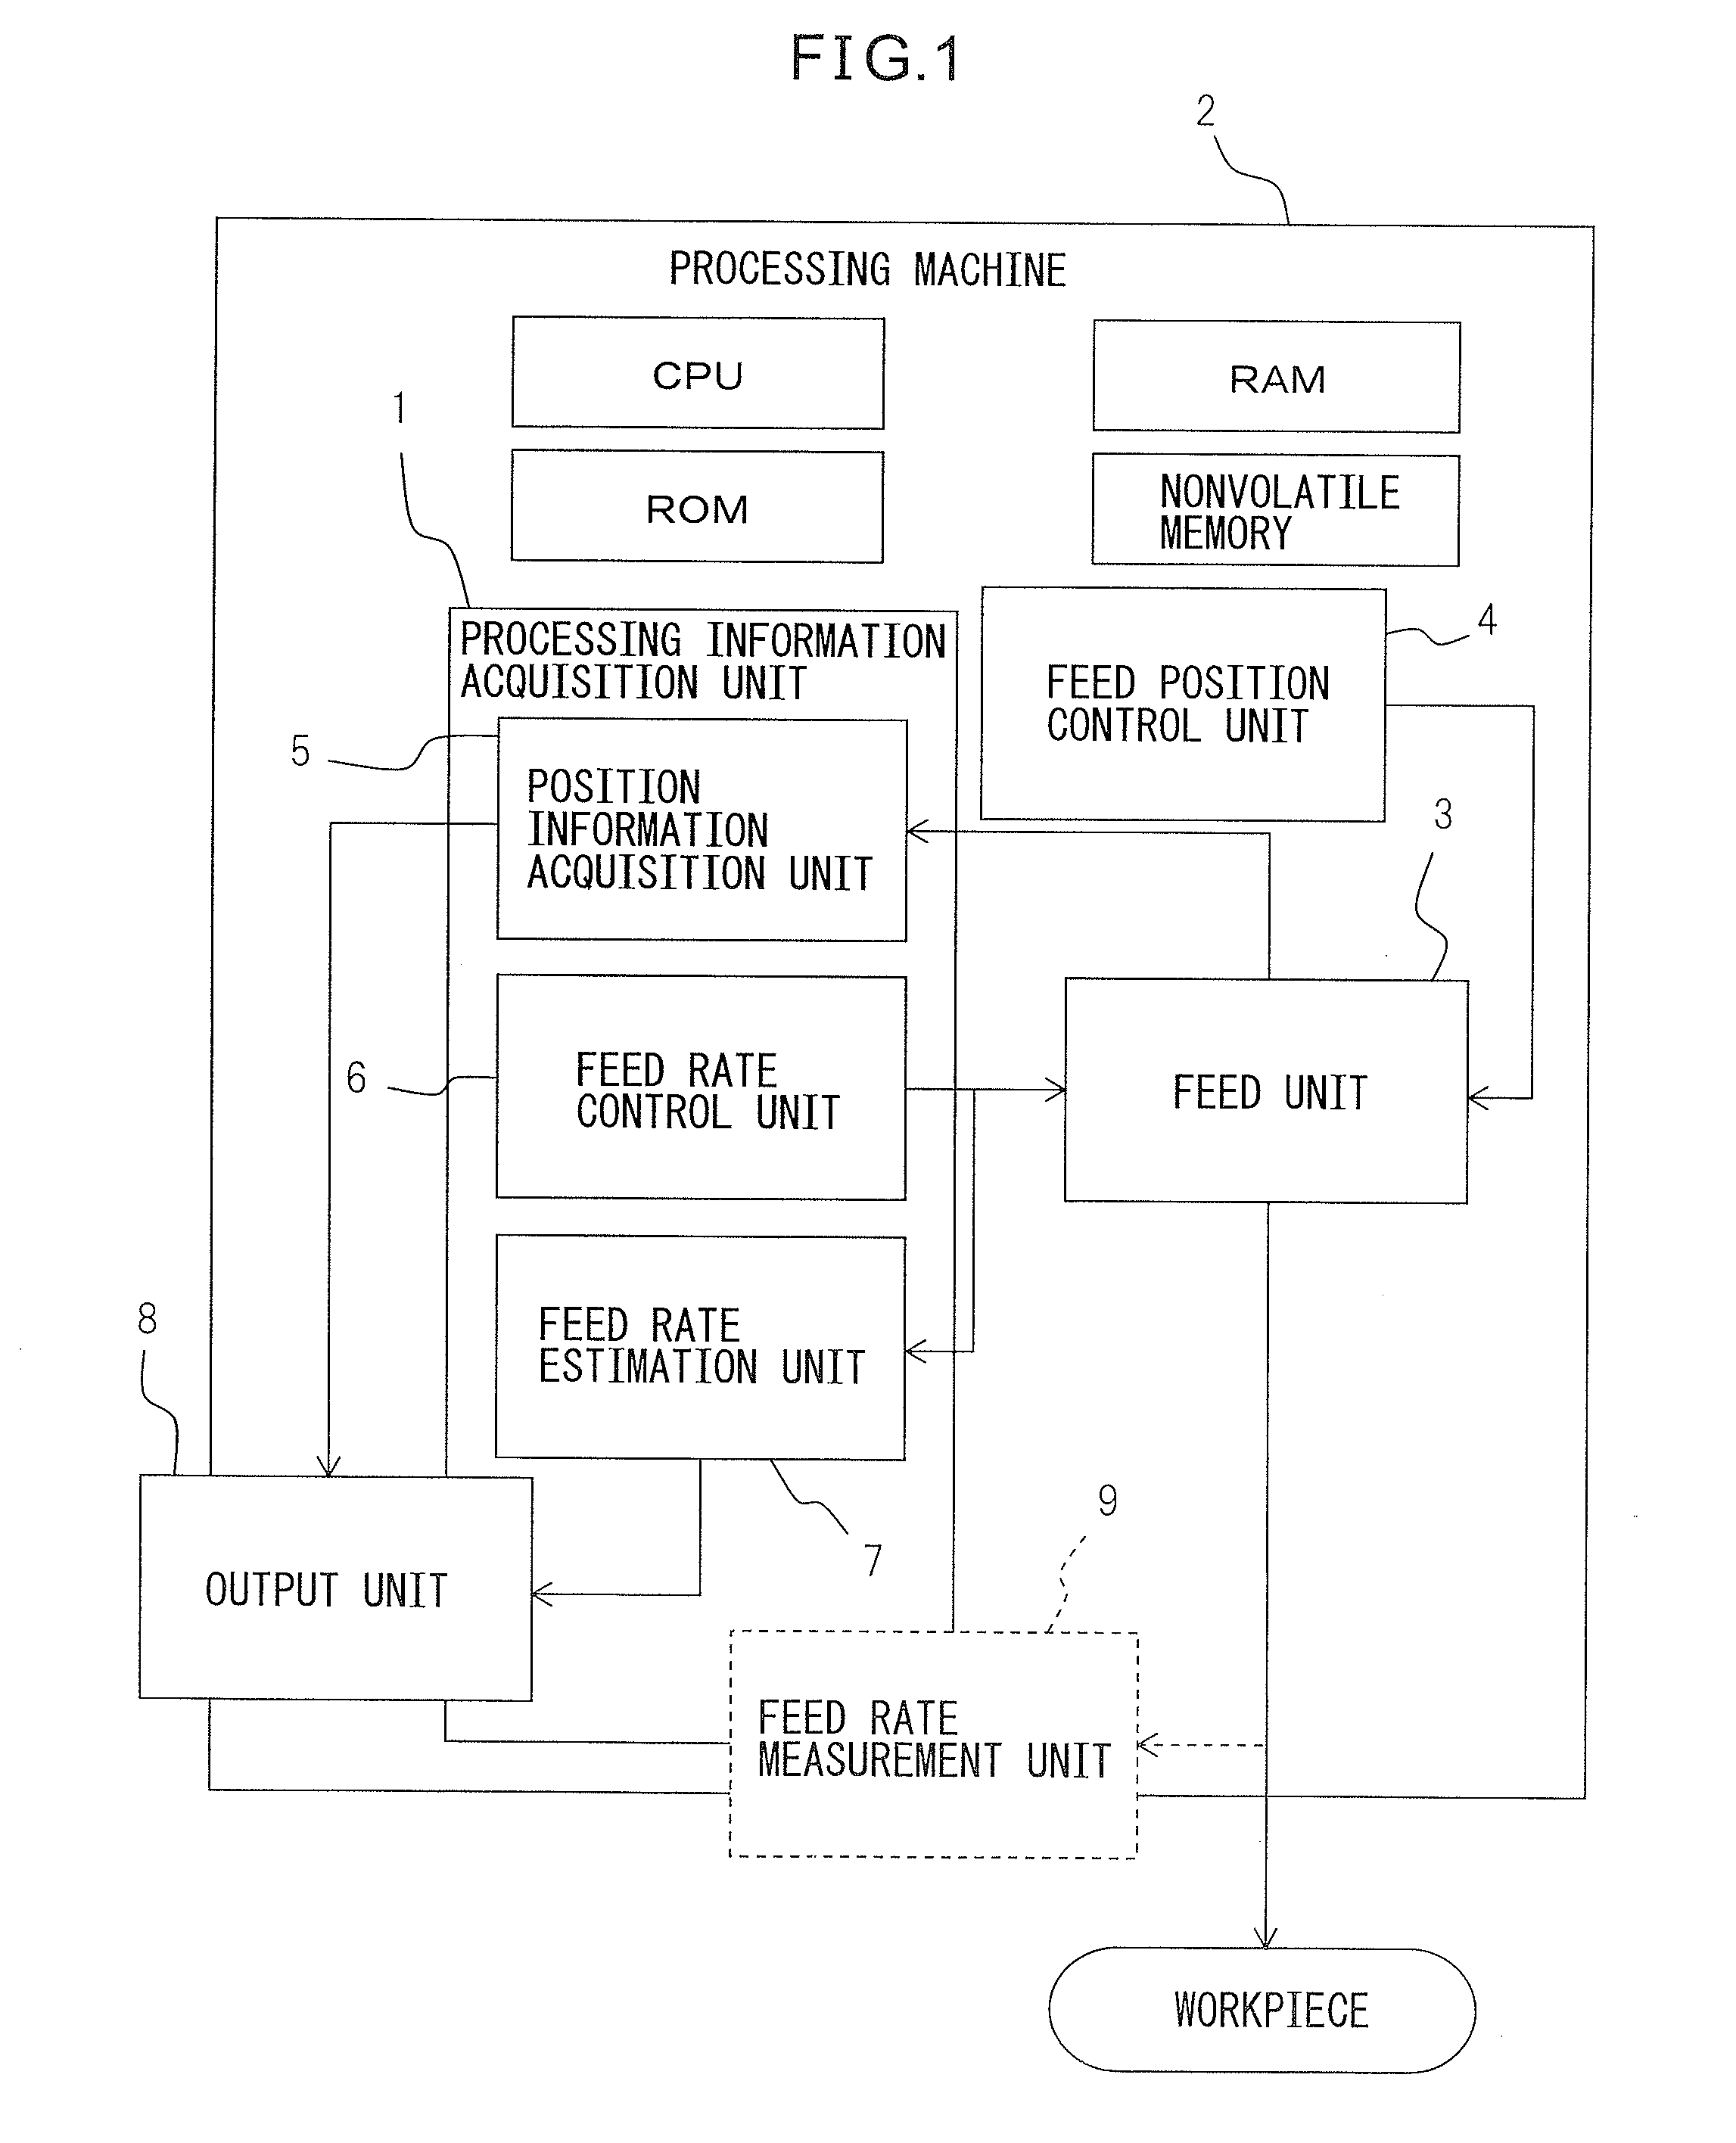 Processing information acquisition system in processing machine supplying processing point with energy or material